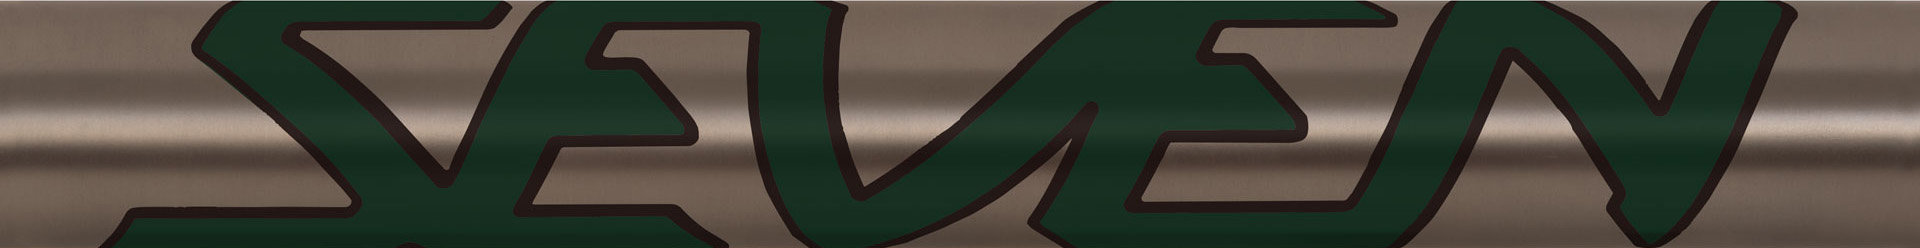 slant seven down tube graphic in myrtle green, black coffee outline